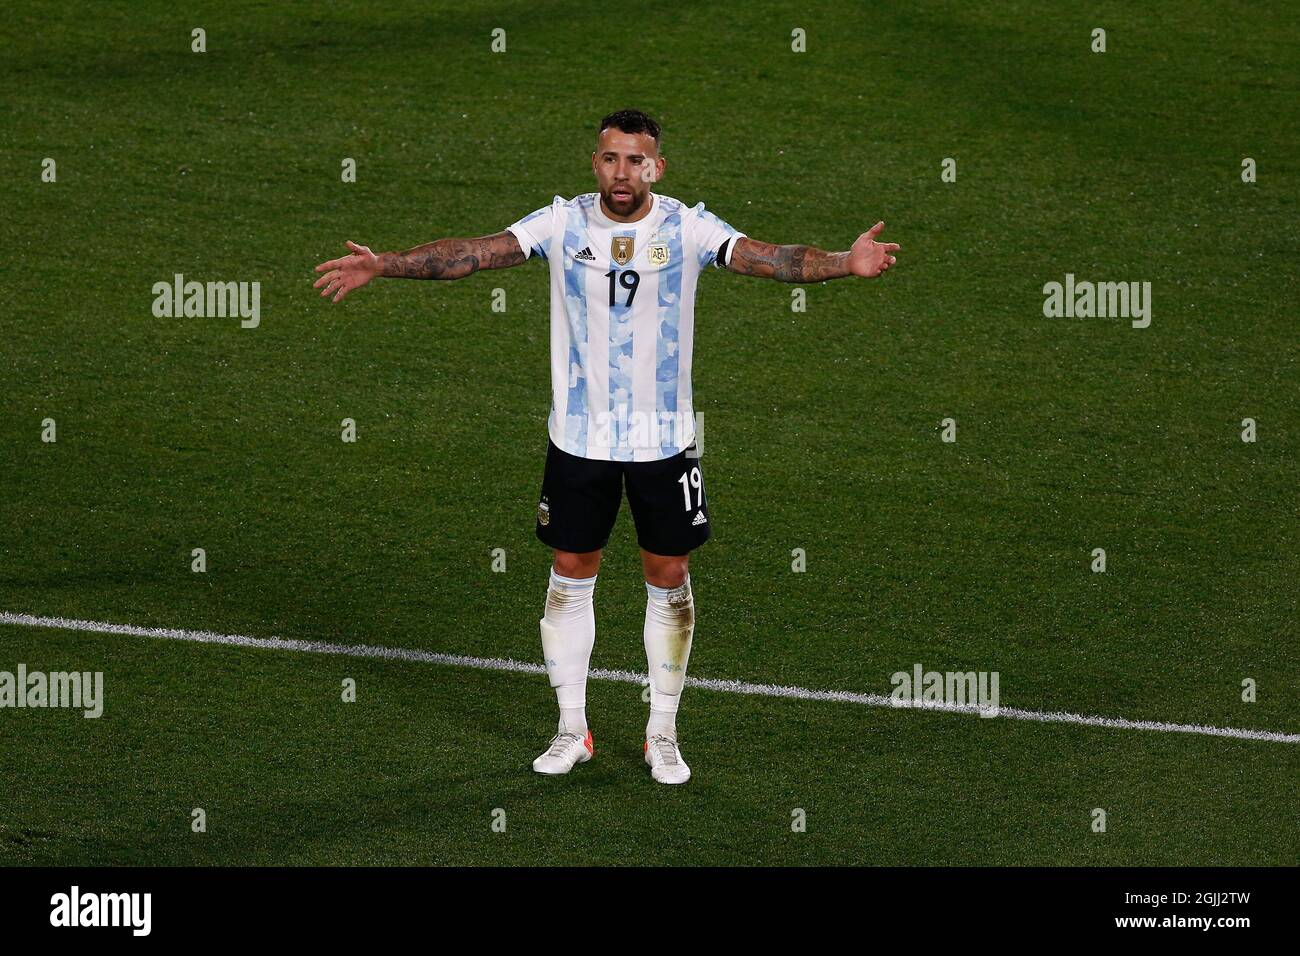 Buenos Aires, Argentina. 09th Sep, 2021. BUENOS AIRES - SEPTEMBER 9: Argentina defender Nicolas Otamendi (19) reacts during a match between Argentina and Bolivia as part of South American Qualifiers for Qatar 2022 at Estadio Monumental Antonio Vespucio Liberti on September 9, 2021 in Buenos Aires, Argentina. (Photo by Florencia Tan Jun/PxImages) Credit: Px Images/Alamy Live News Stock Photo